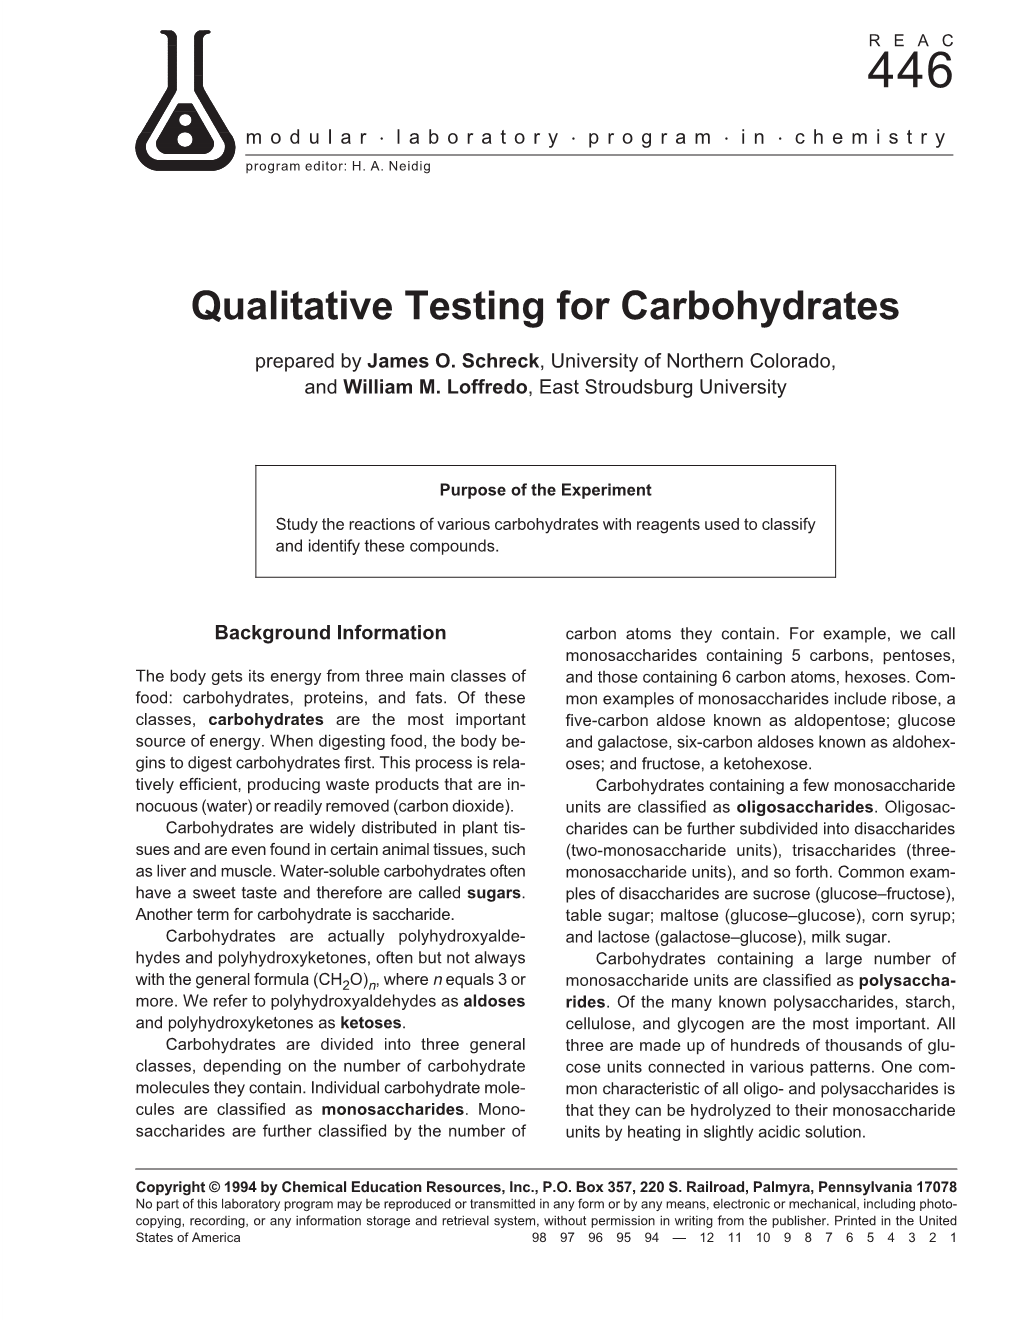 Qualitative Testing for Carbohydrates